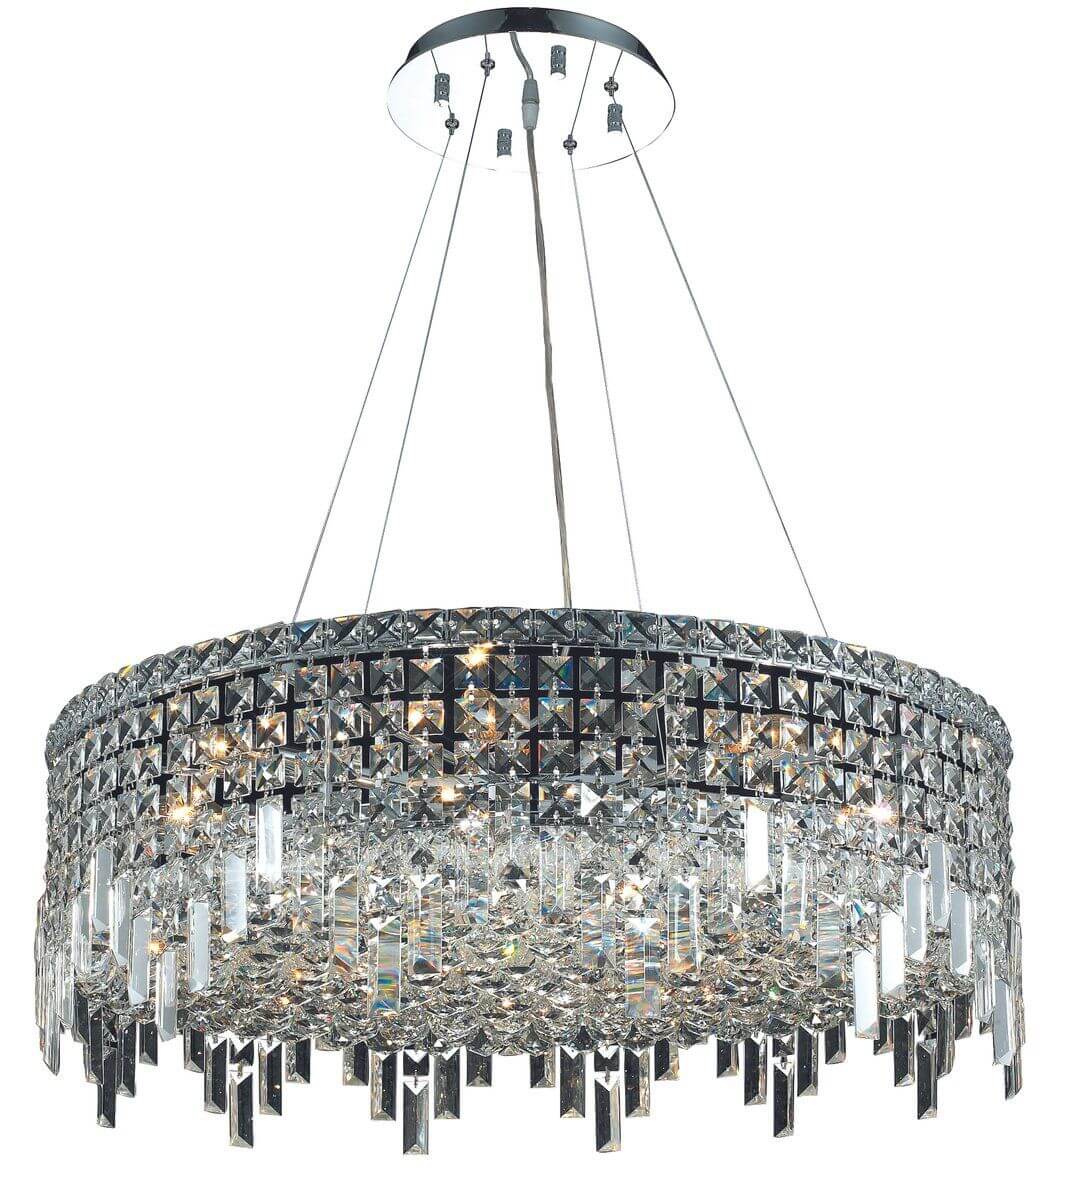 Elegant Lighting Maxime 12 Light 28 Inch Crystal Chandelier In Chrome With Royal Cut Clear Crystal V2031D28C/RC